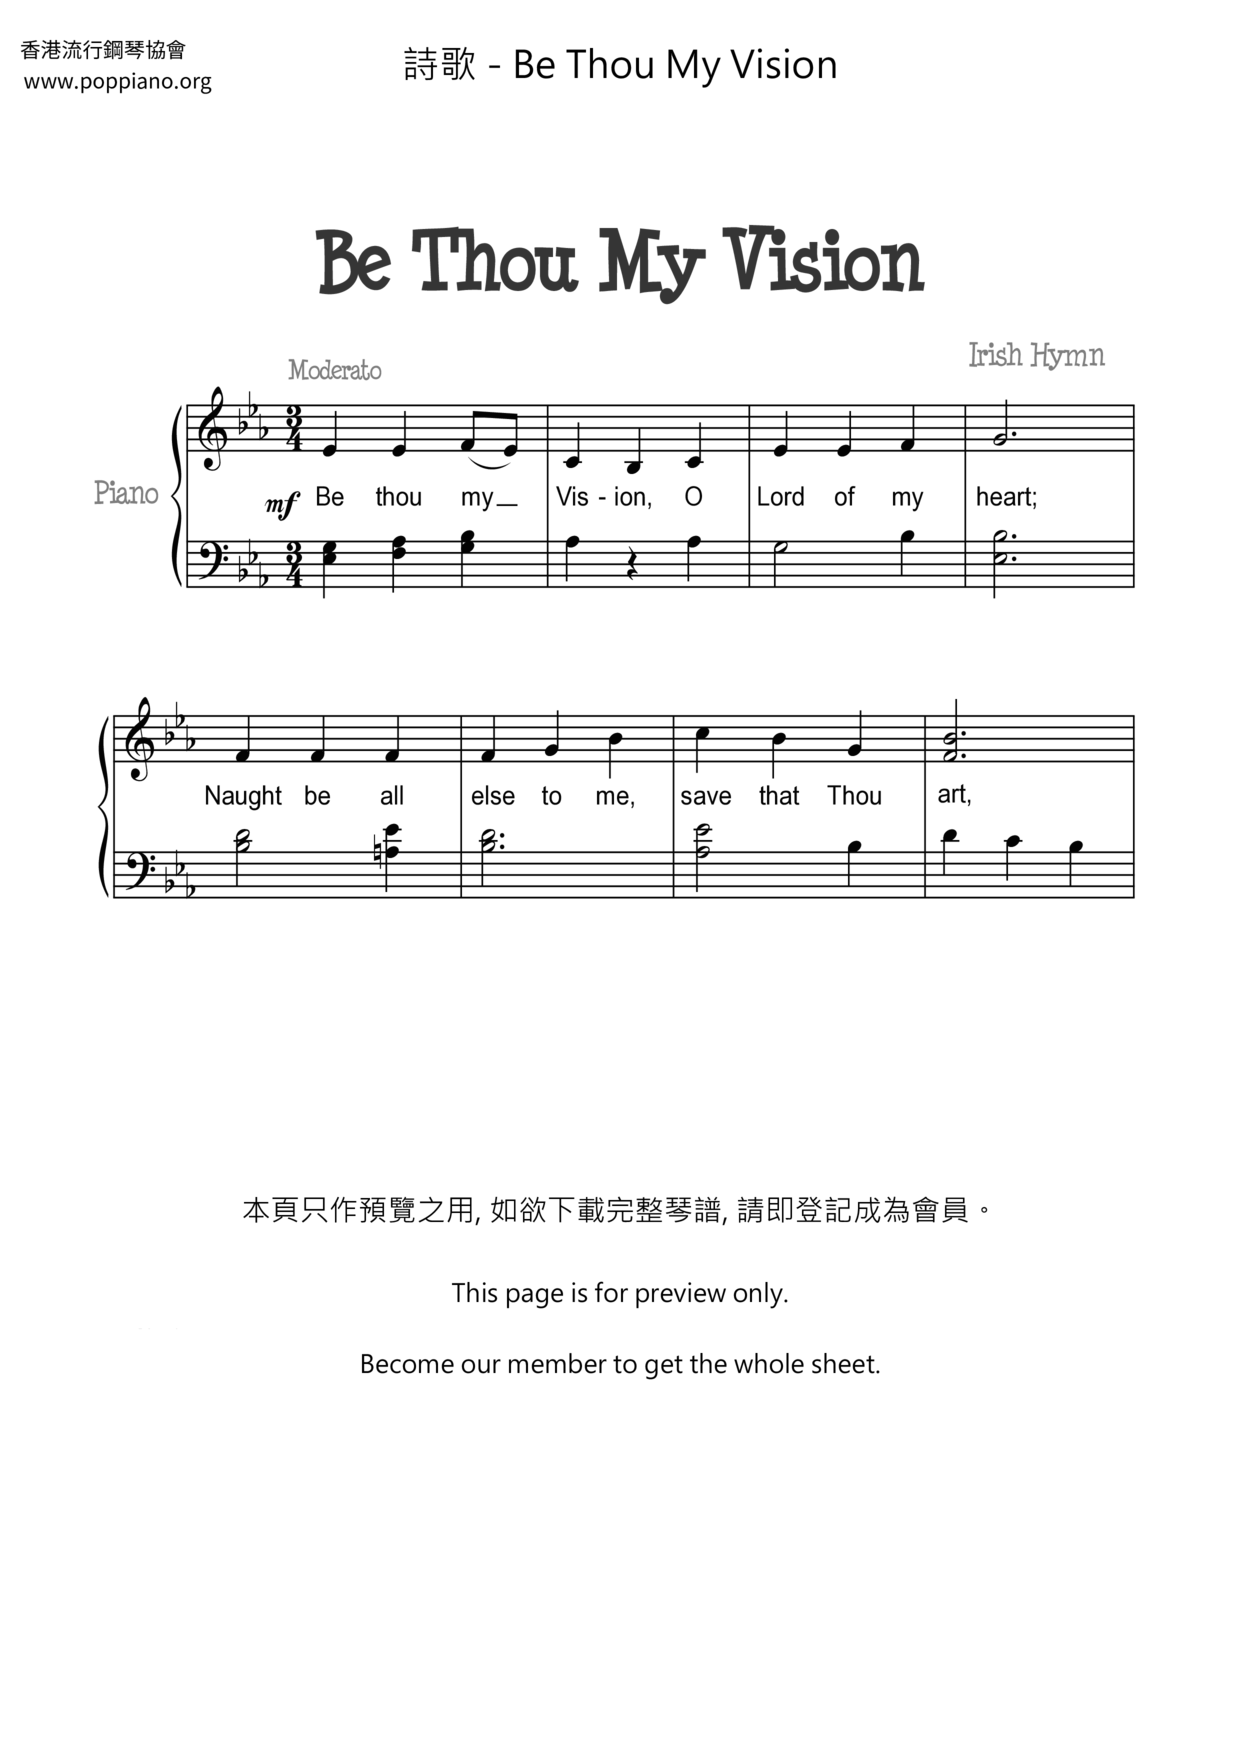 Be Thou My Vision Score